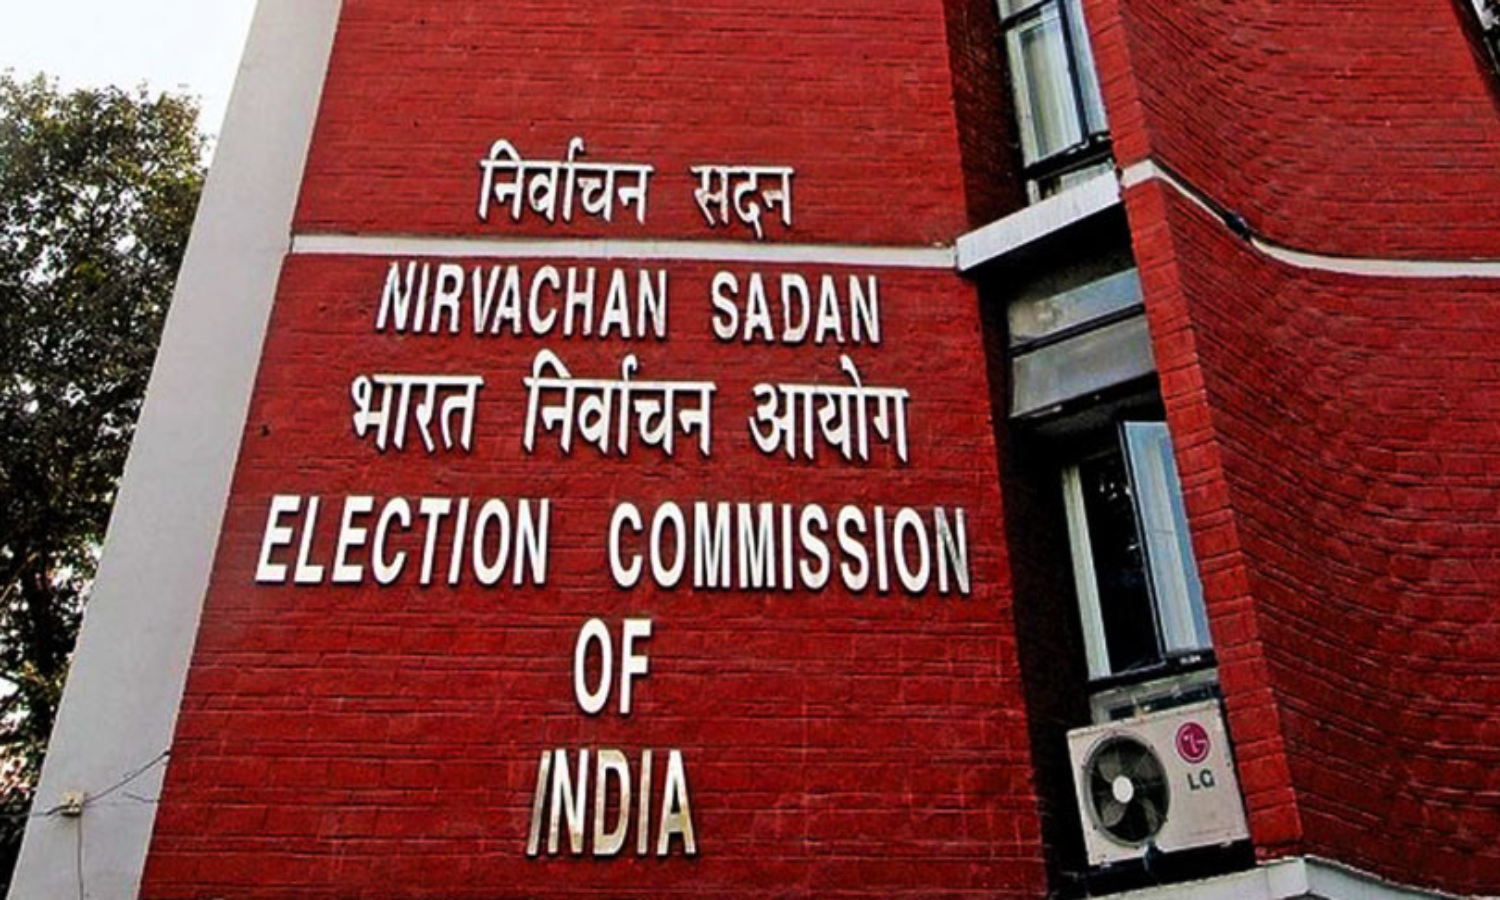 Delhi High Court Directs Election Commission To Respond On Plea For Regulation Of Internal Elections In Political Parties Within 2 Weeks